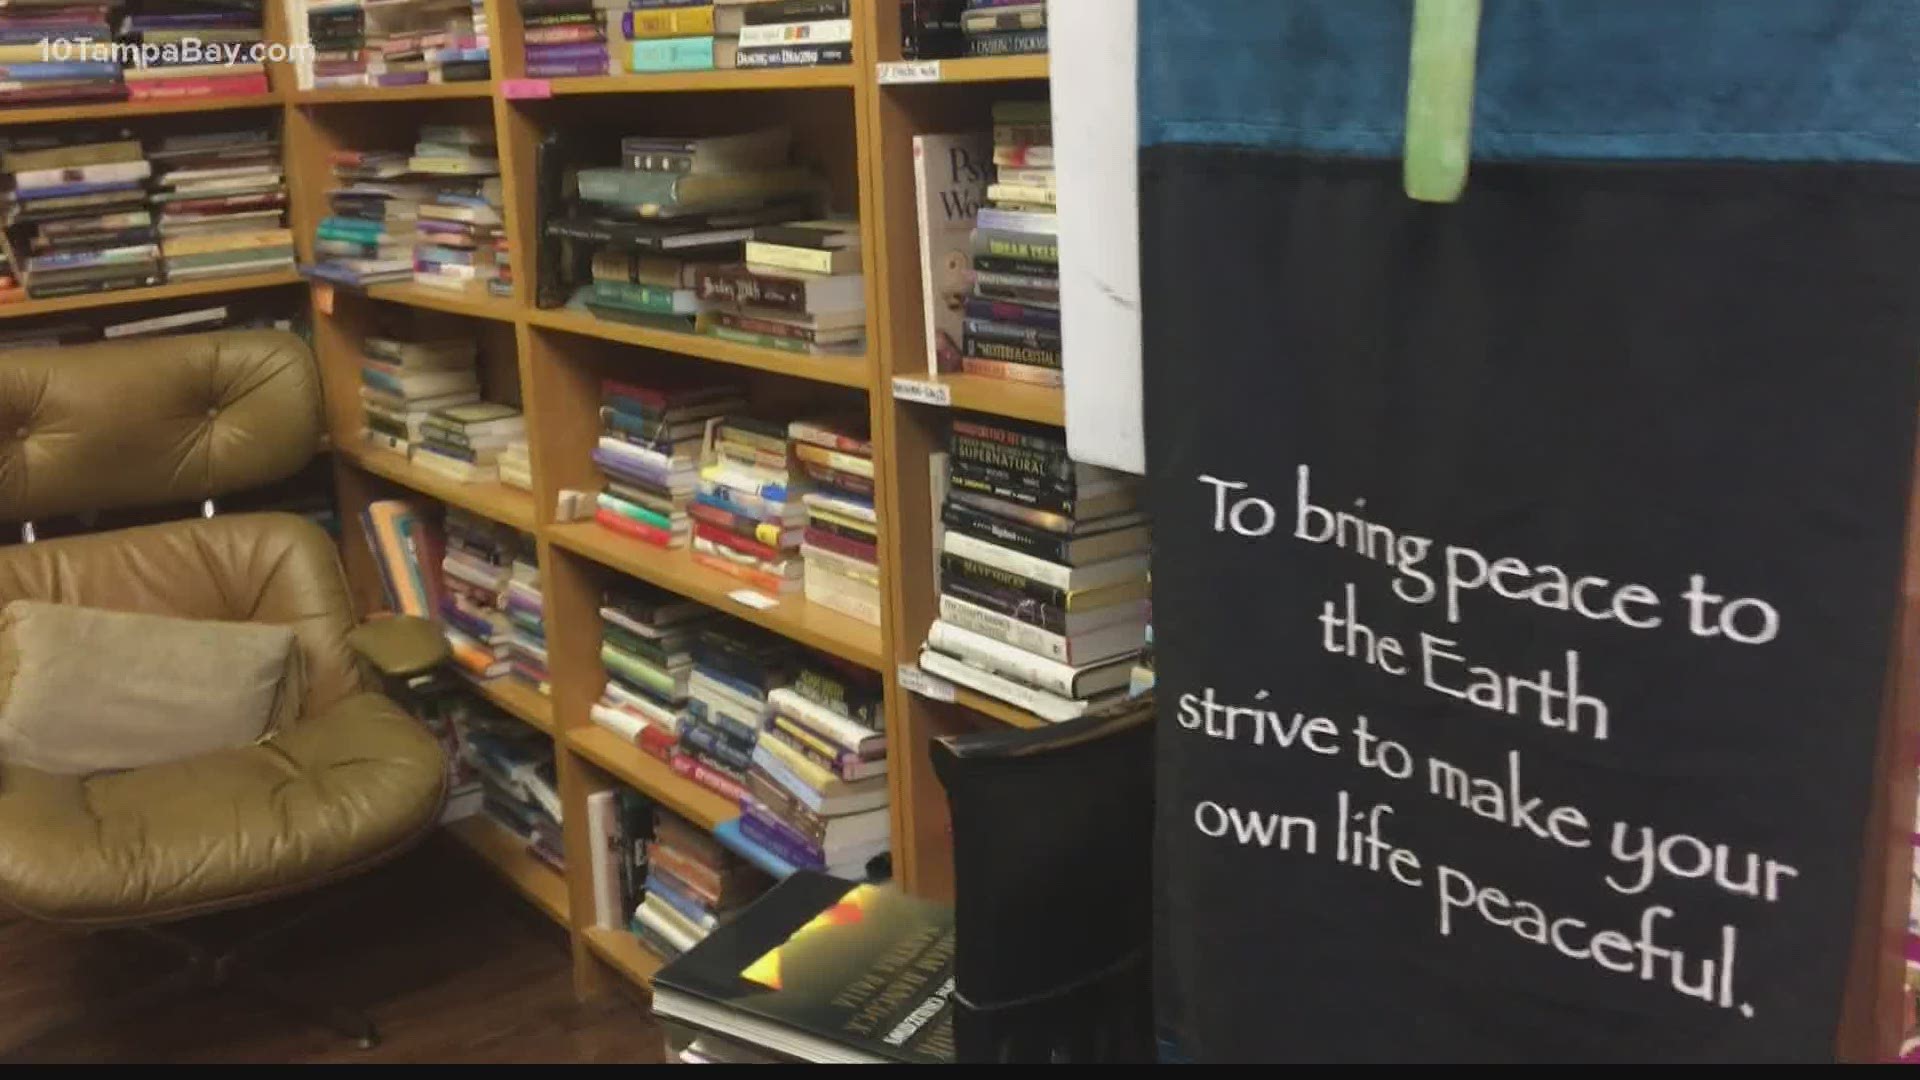 The longtime Sarasota bookstore is struggling and looking to raise funds to keep the doors open amid the coronavirus pandemic.